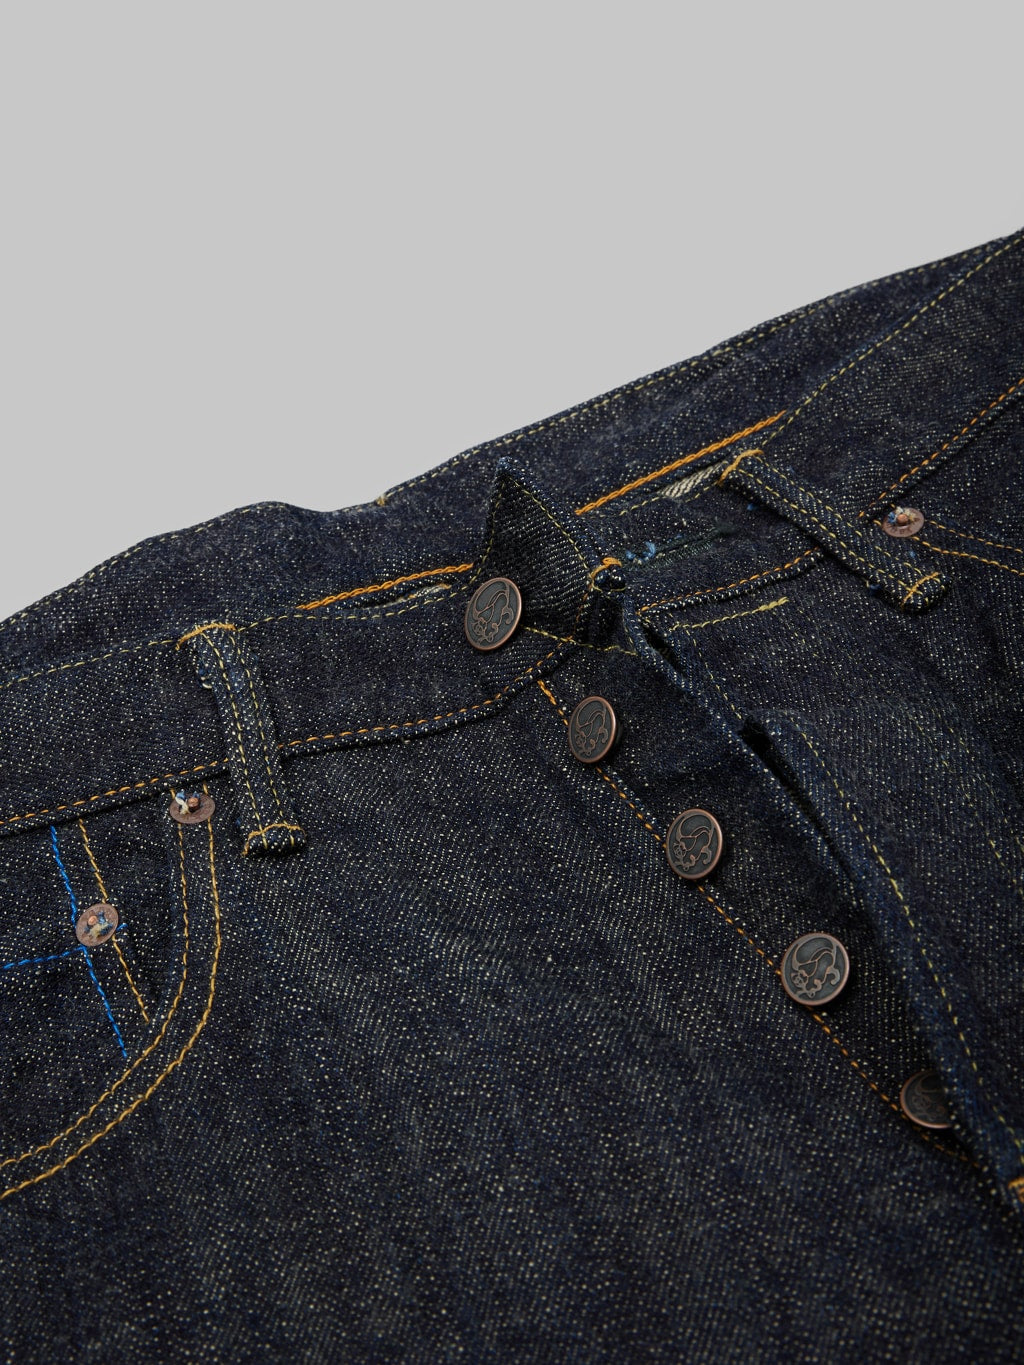 Tanuki Zetto Benkei High Tapered Jeans copper buttons details